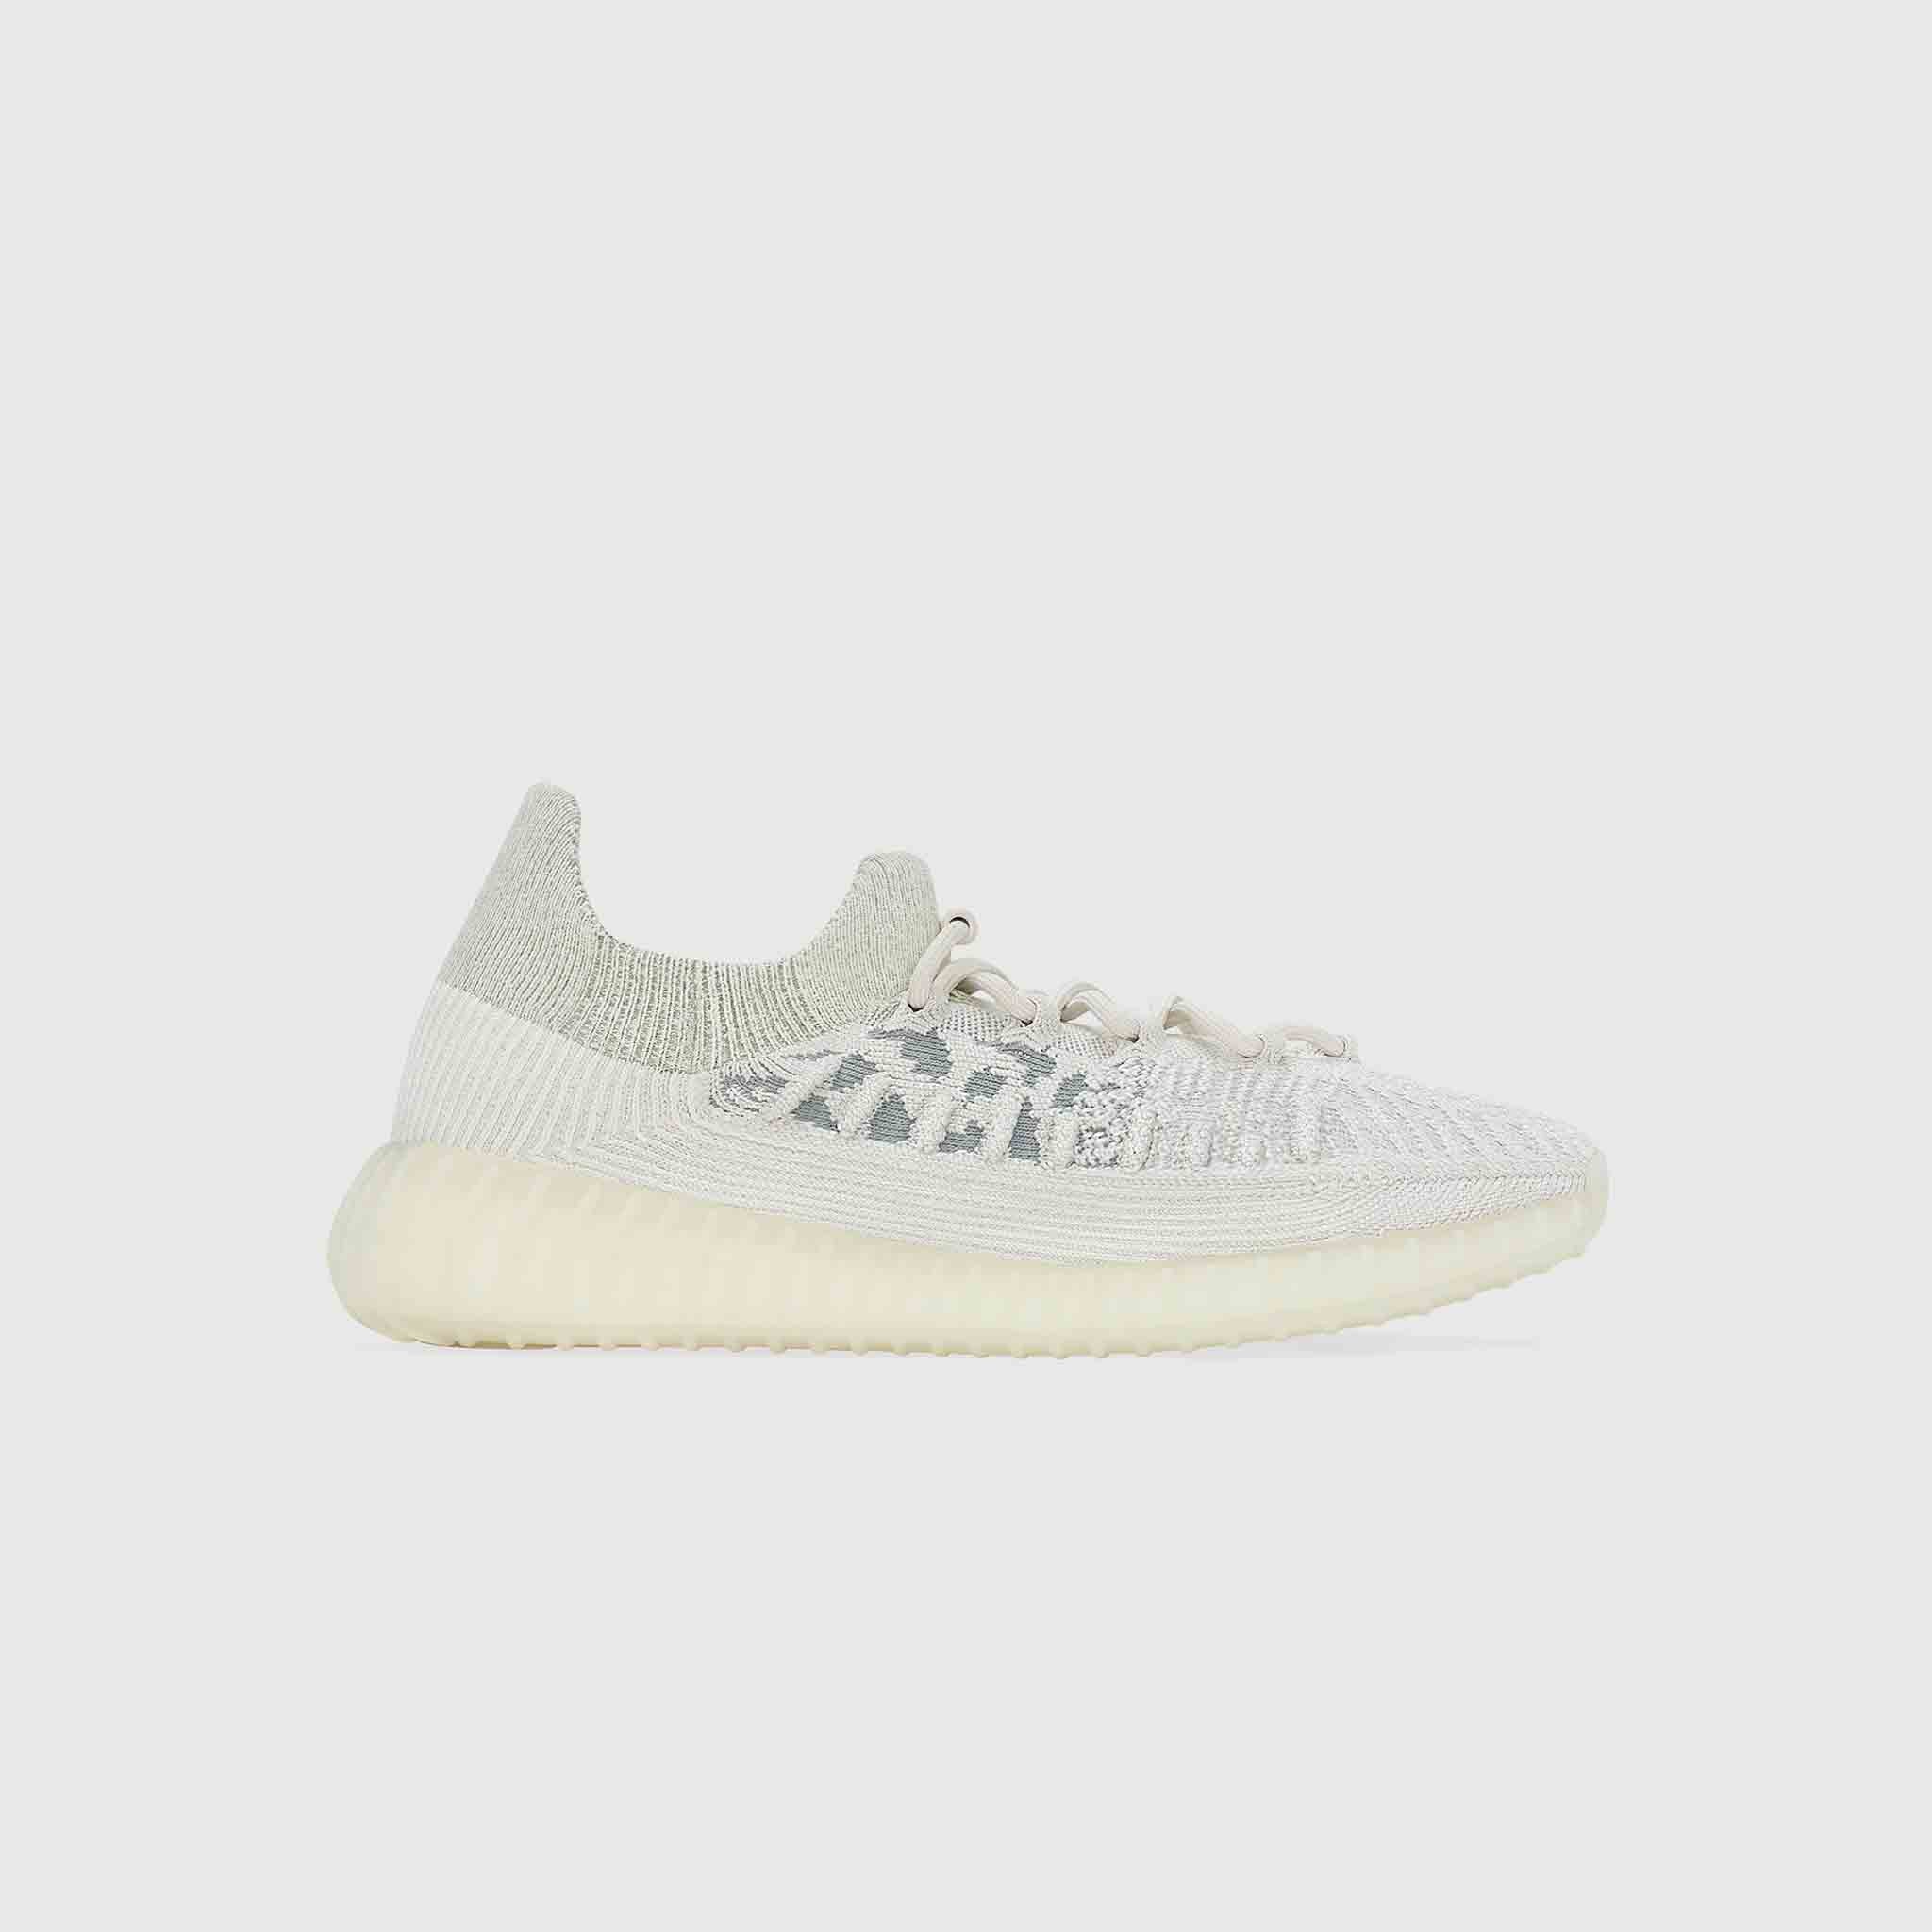 ADIDAS  YZY350V2CMPCT  H06519 FRONT